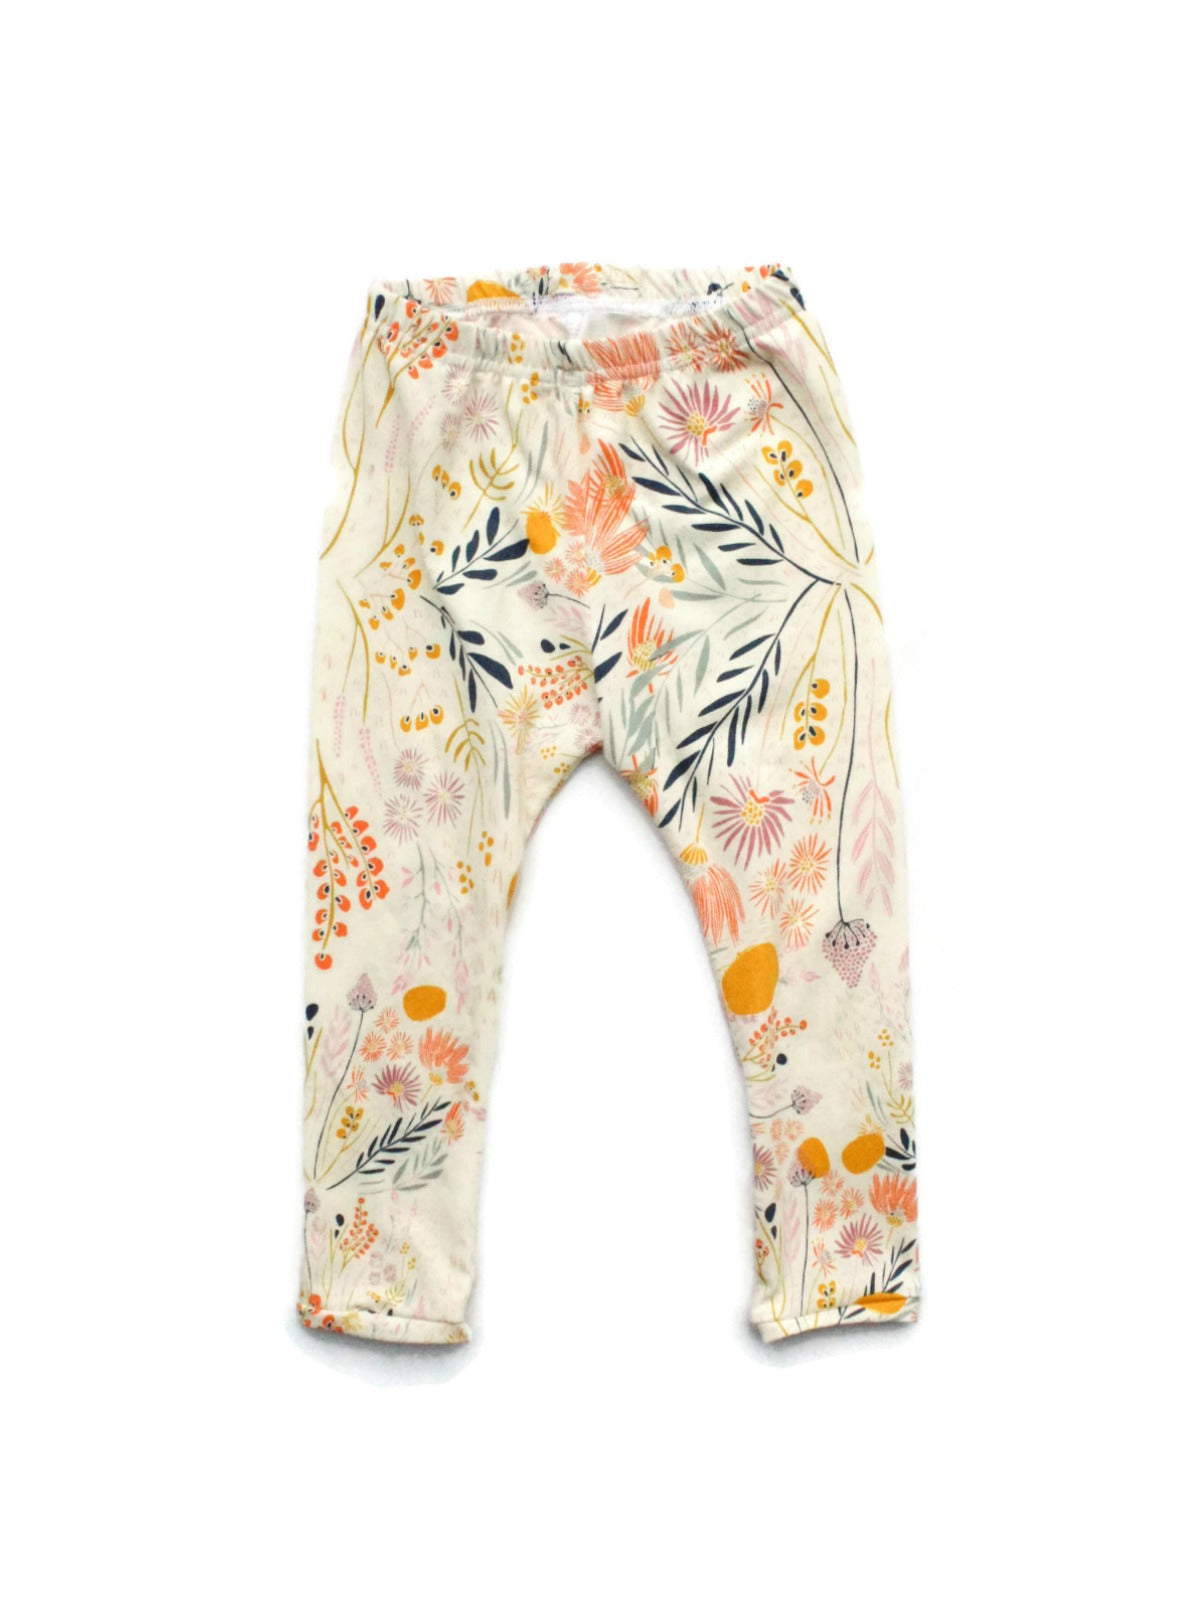 Eleven Paris Girls The Pink Panther Printed Leggings, Size 12Y  19S6LG18-M022 - Apparel - Jomashop